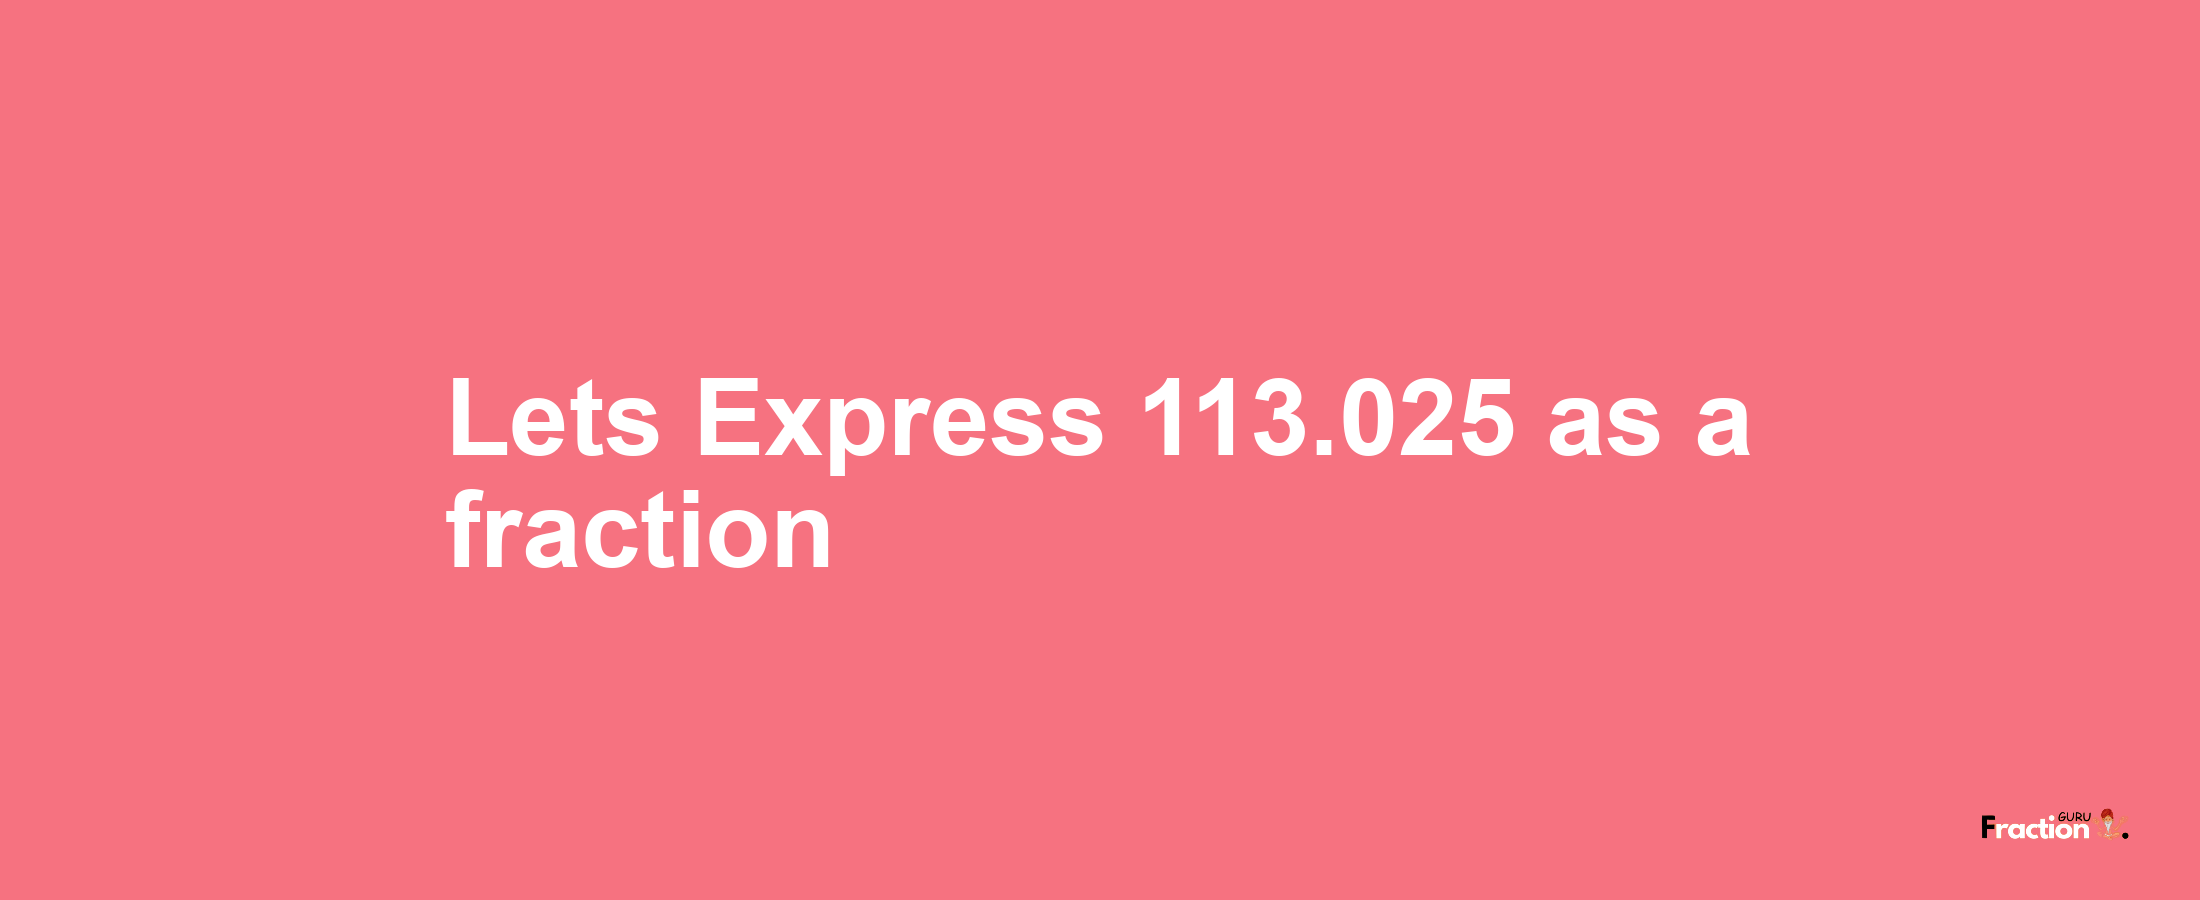 Lets Express 113.025 as afraction